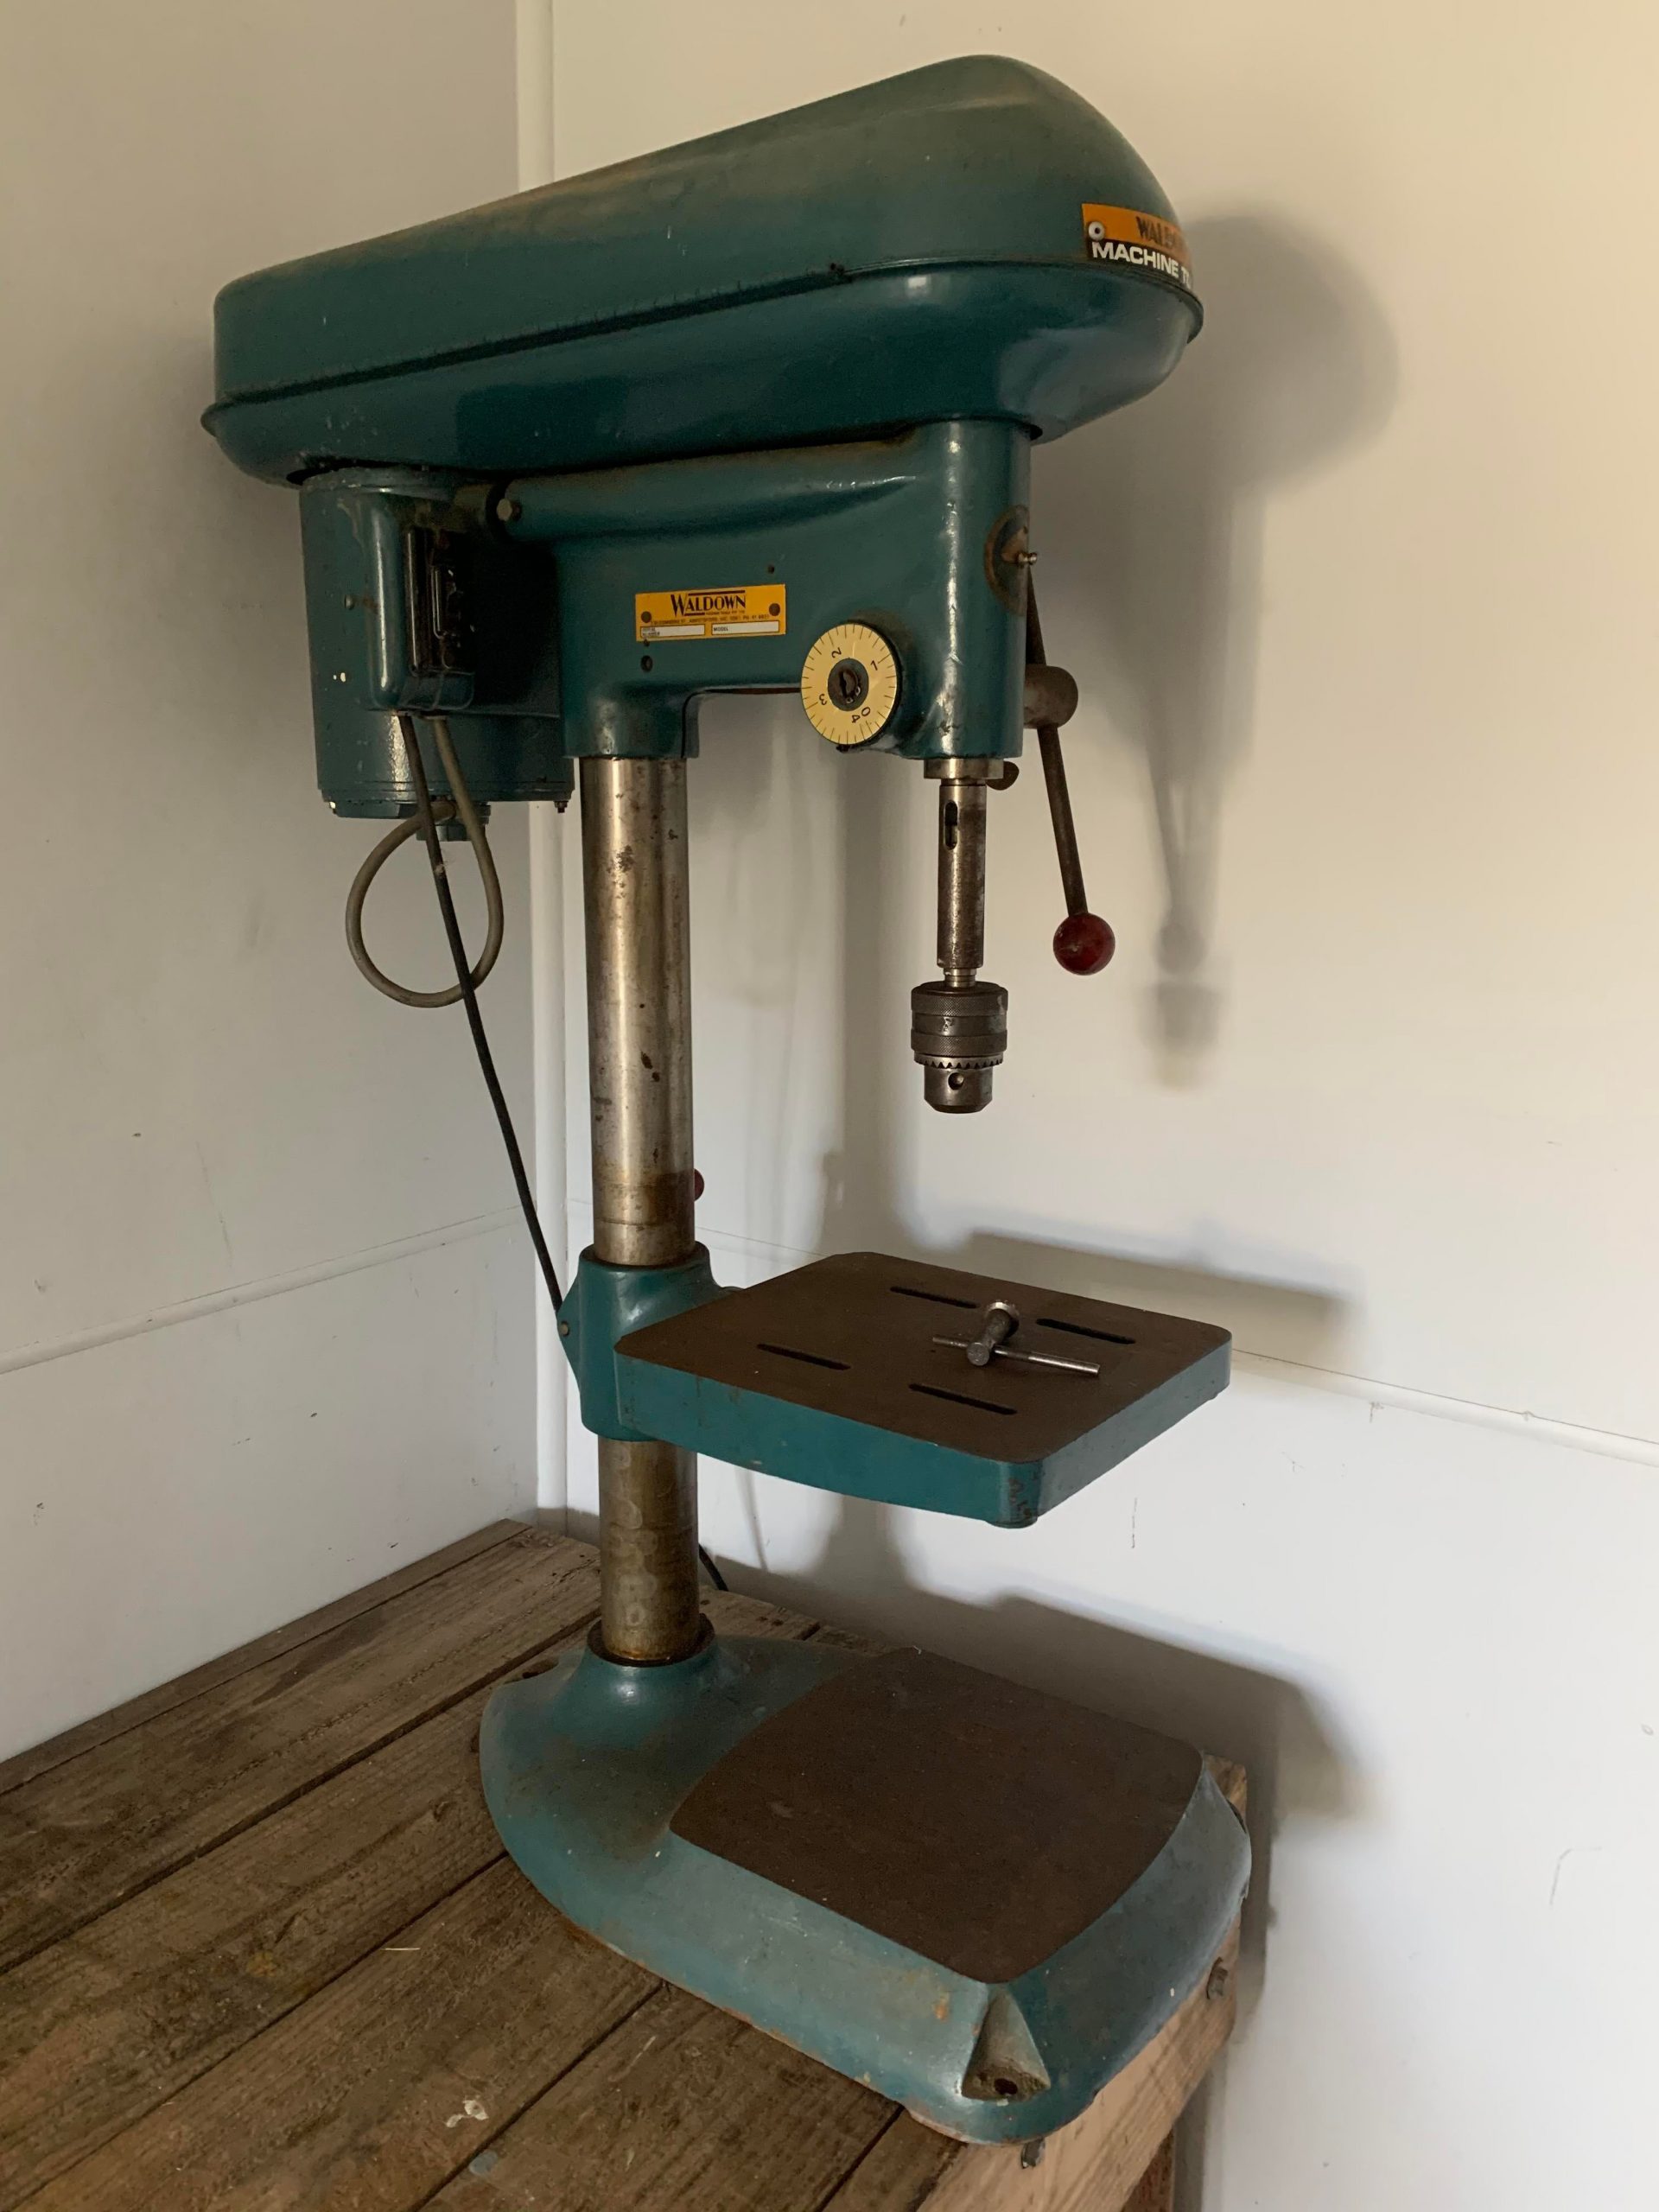 Waldown Drill Pres Can Anyone Tell Me How Old This Amazing Drill Press is?: Vintagetools Of Waldown Drill Pres